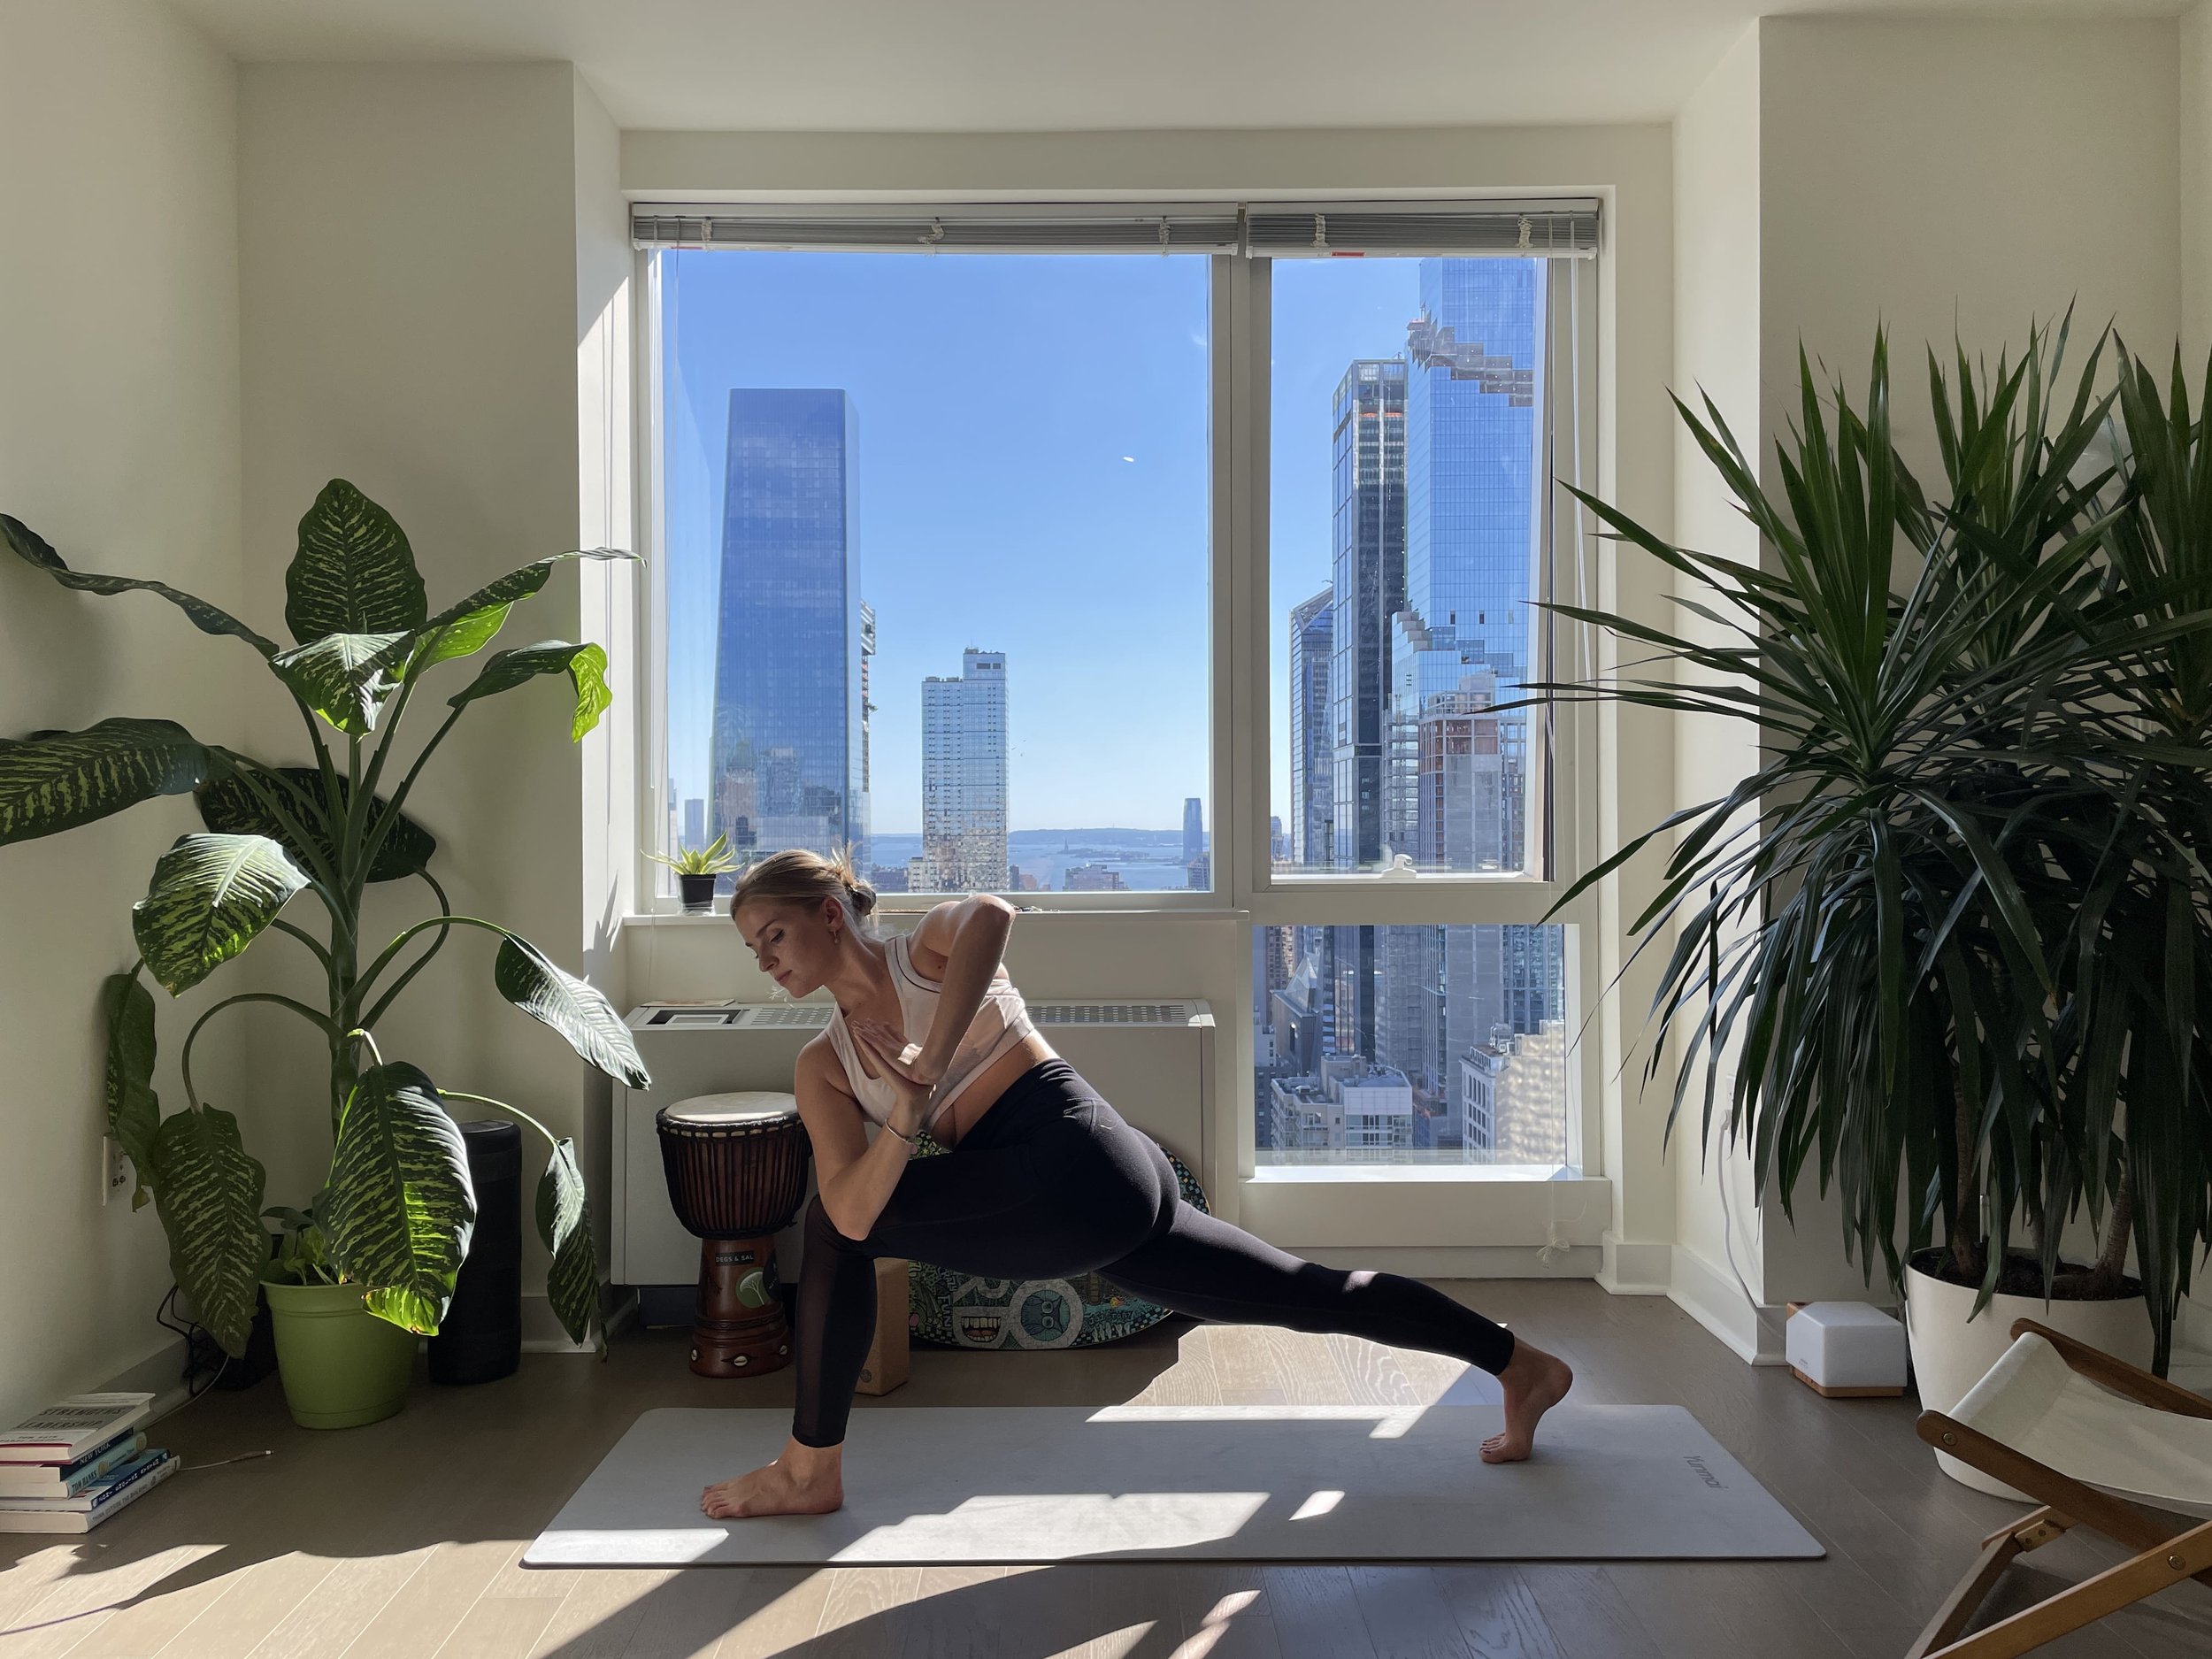 Hatha Flow Yoga - Breathing Place Yoga & Physical Therapy